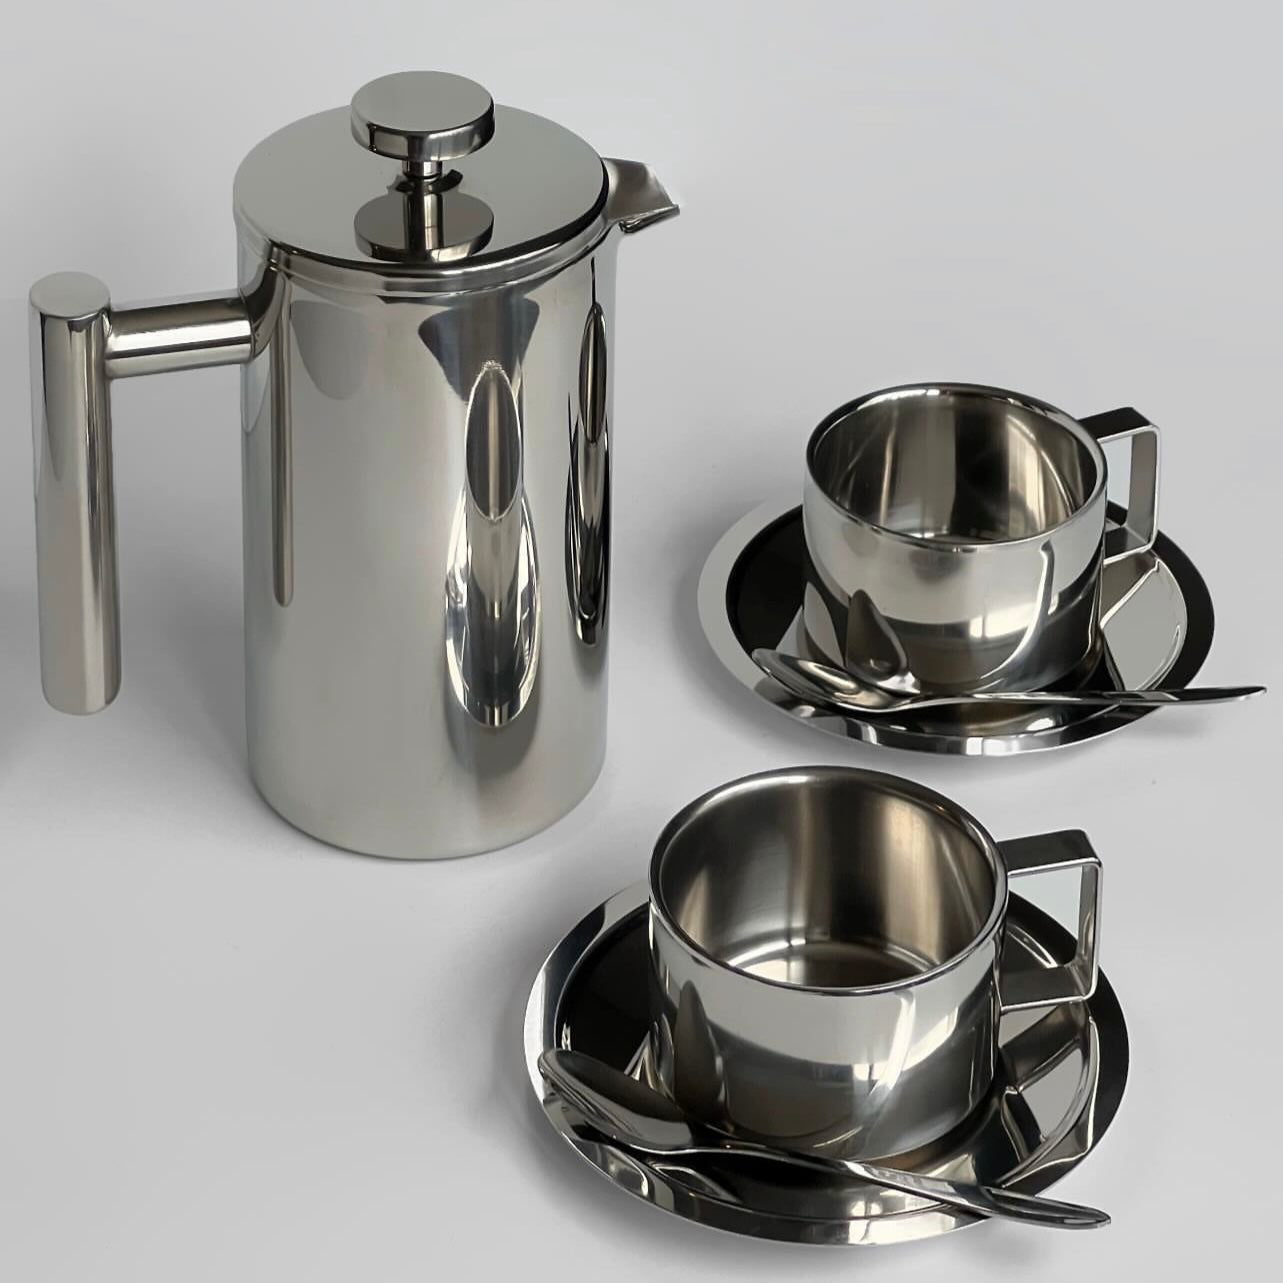 Two Italian Steel Coffee Cups &amp; Stainless Steel French Press